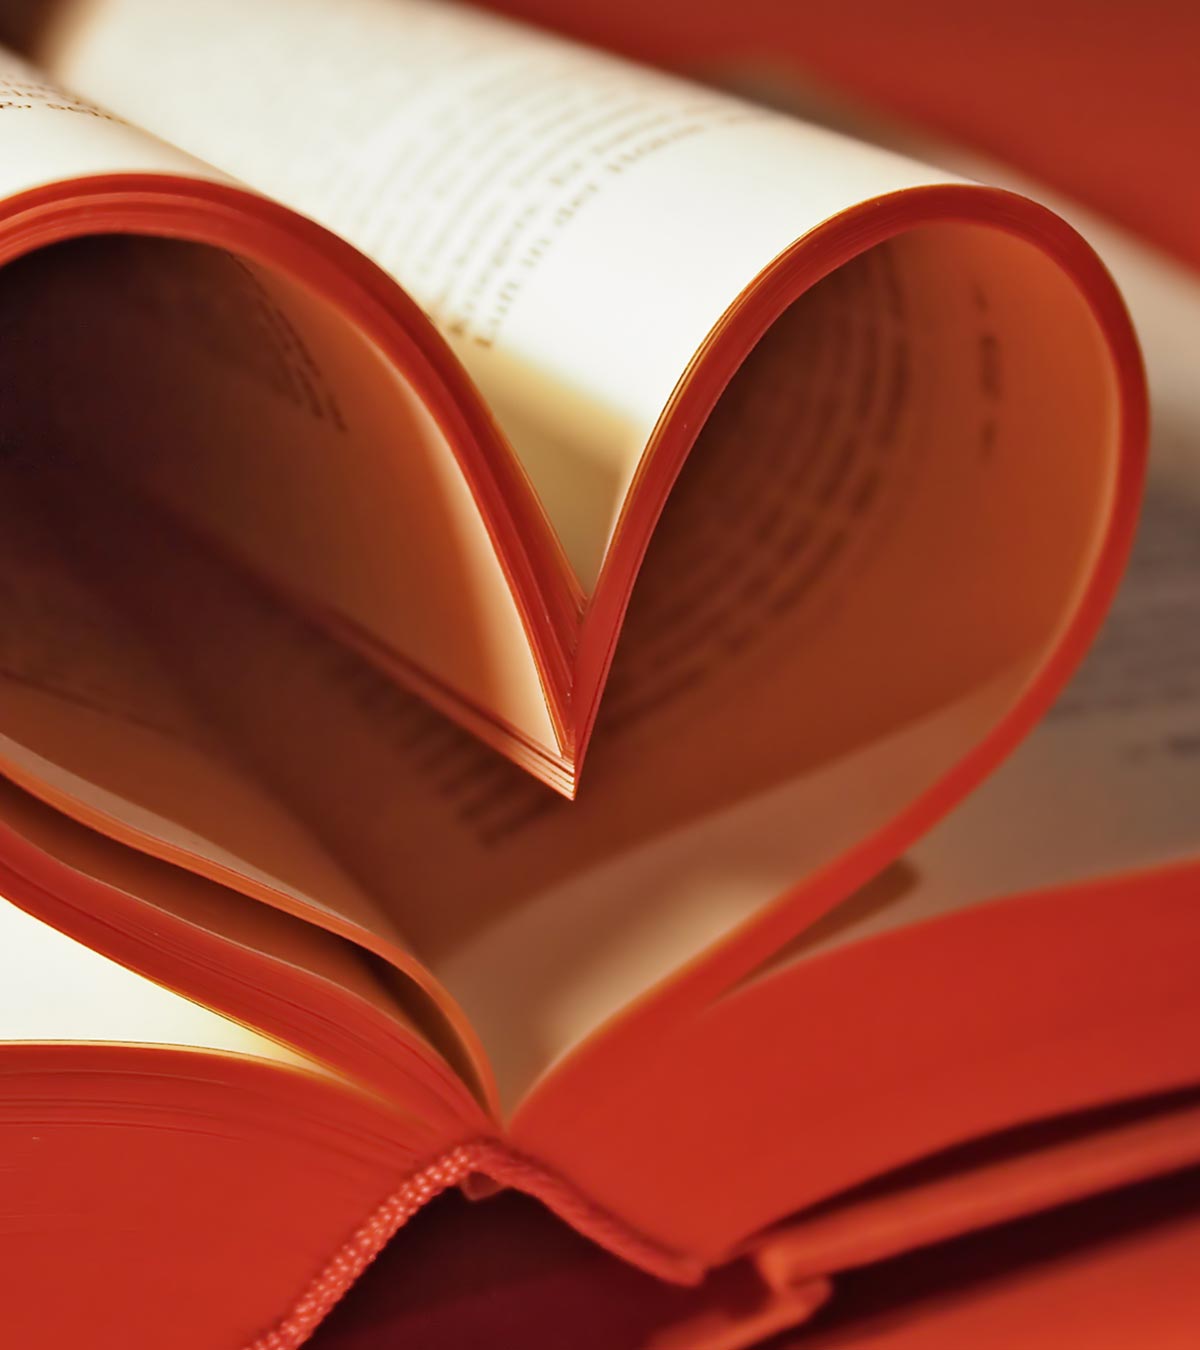 15 Relationship Books For Couples, Relationship Coach-Approved In 2023